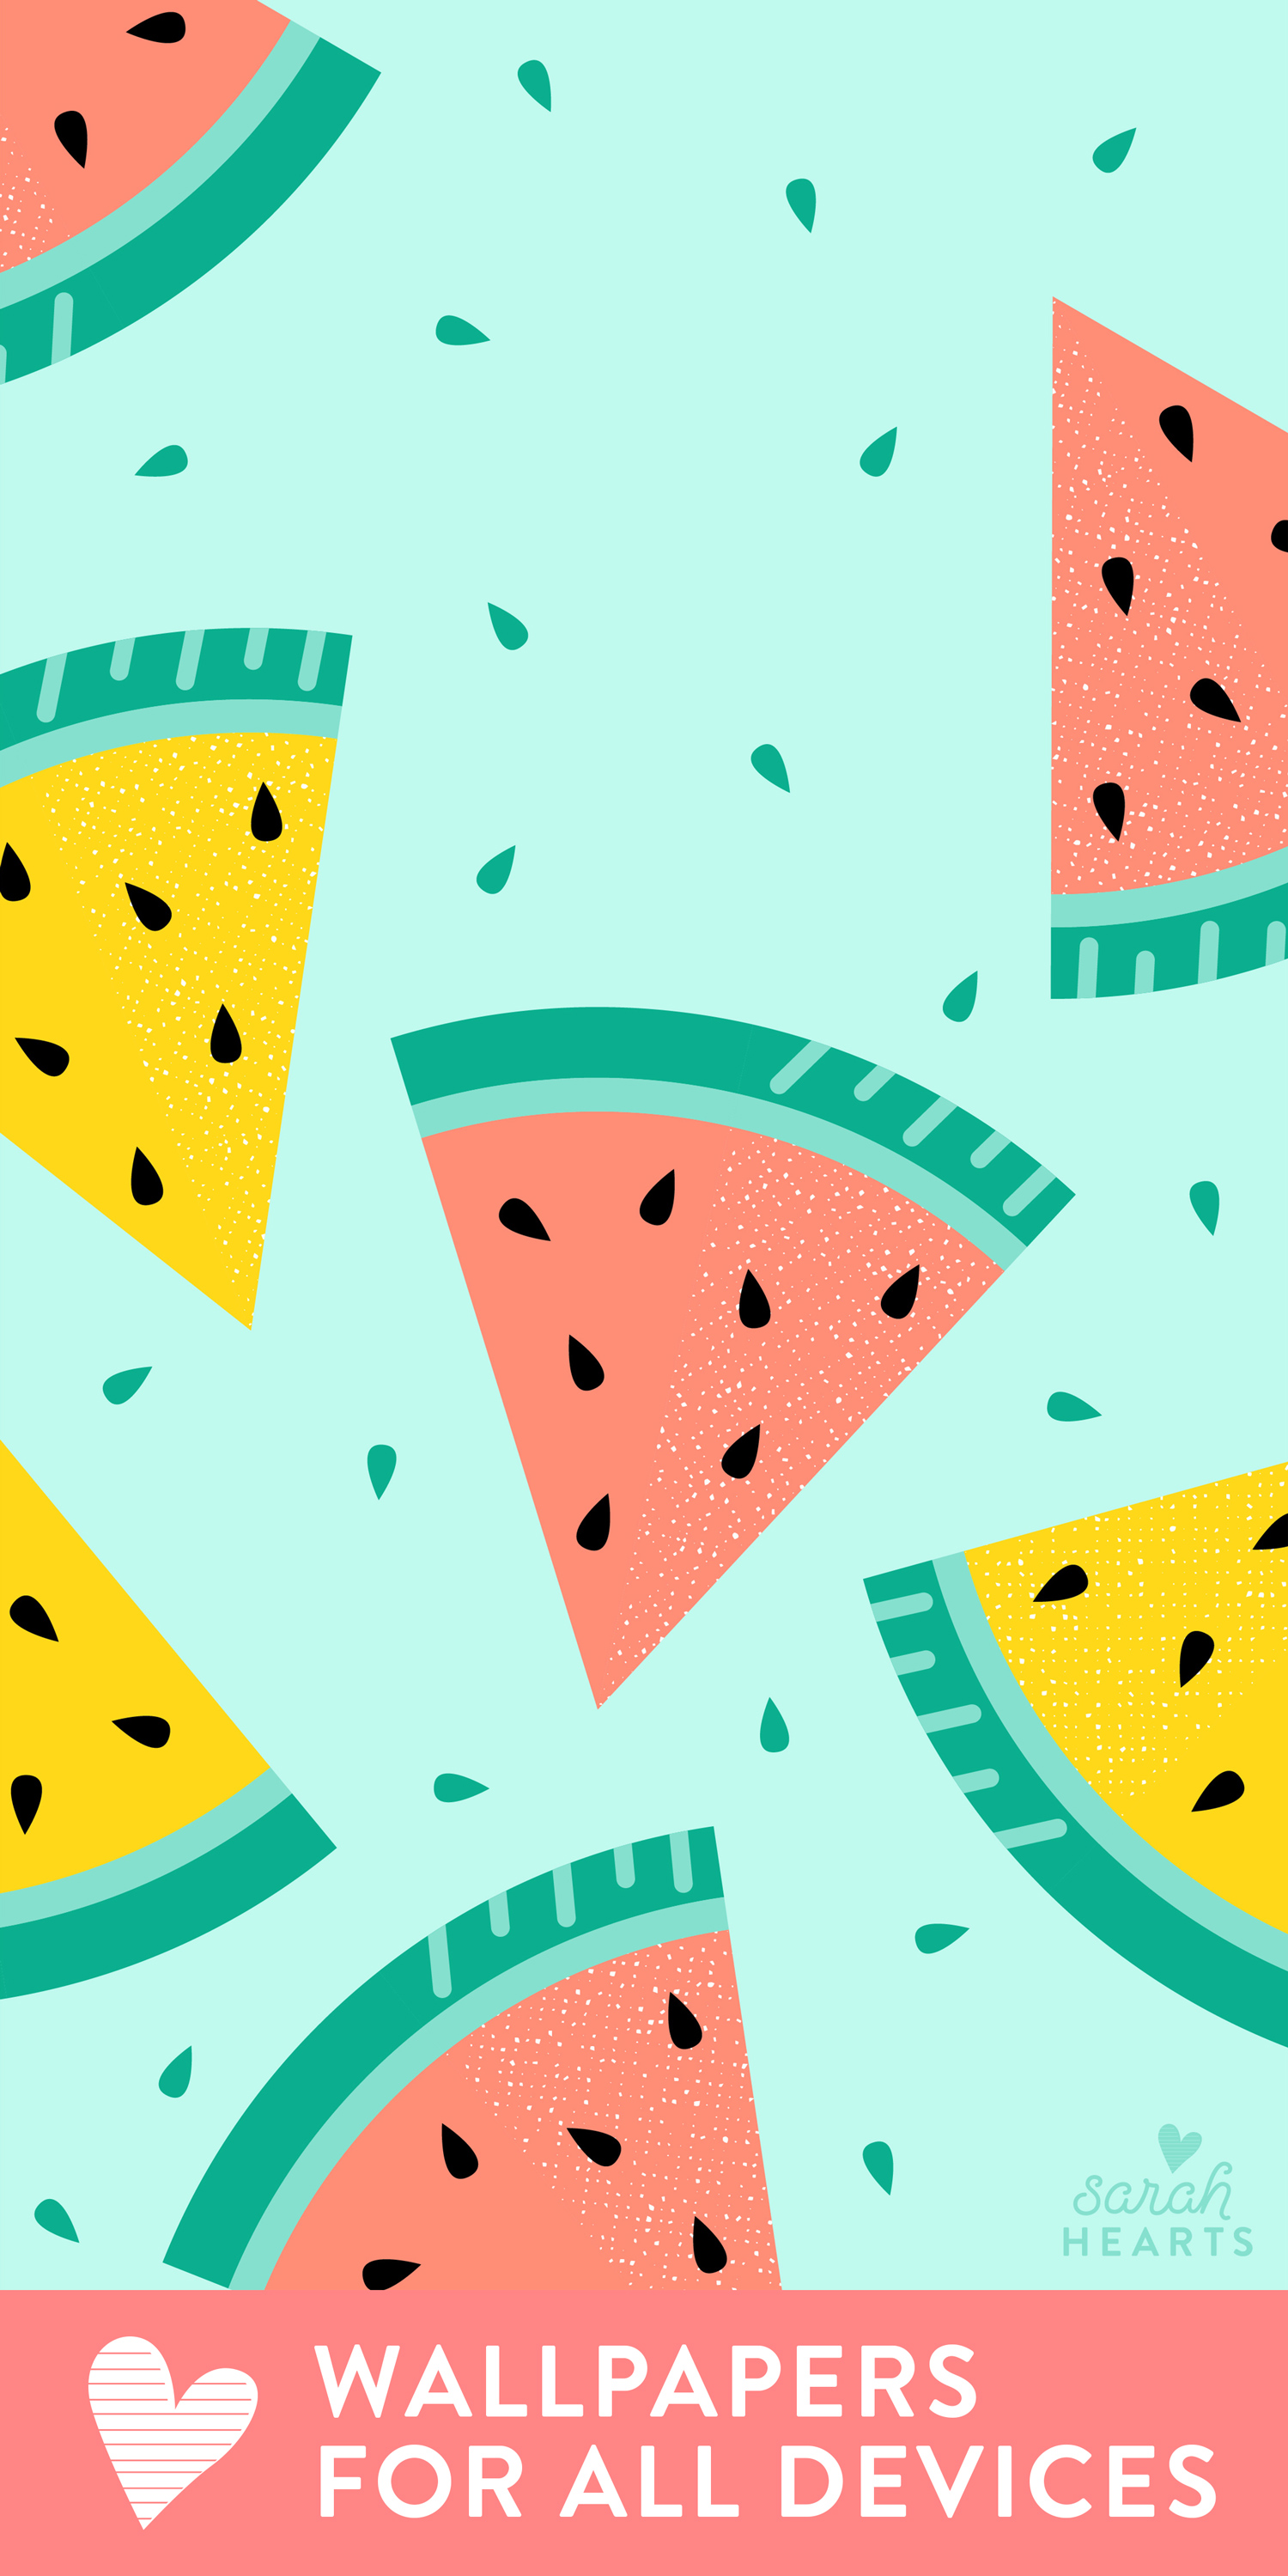 Get Ready For Summer With This Free Watermelon Wallpaper Download It For Your Phone Computer And Tablet Today Sarah Hearts